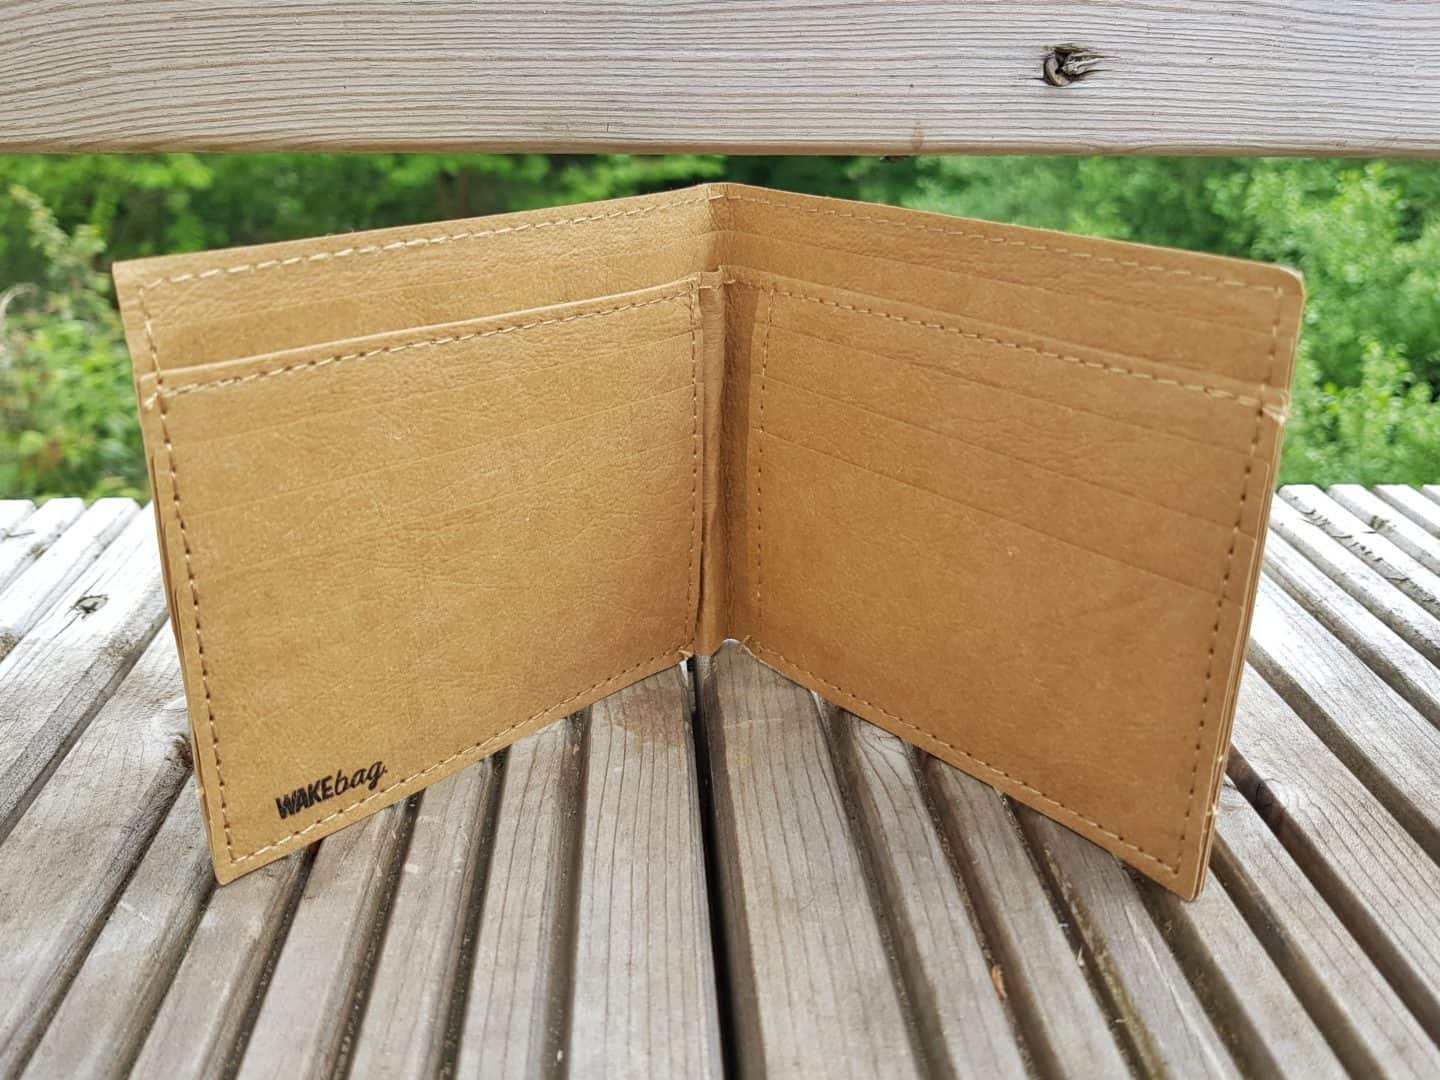 wallet father's day gift